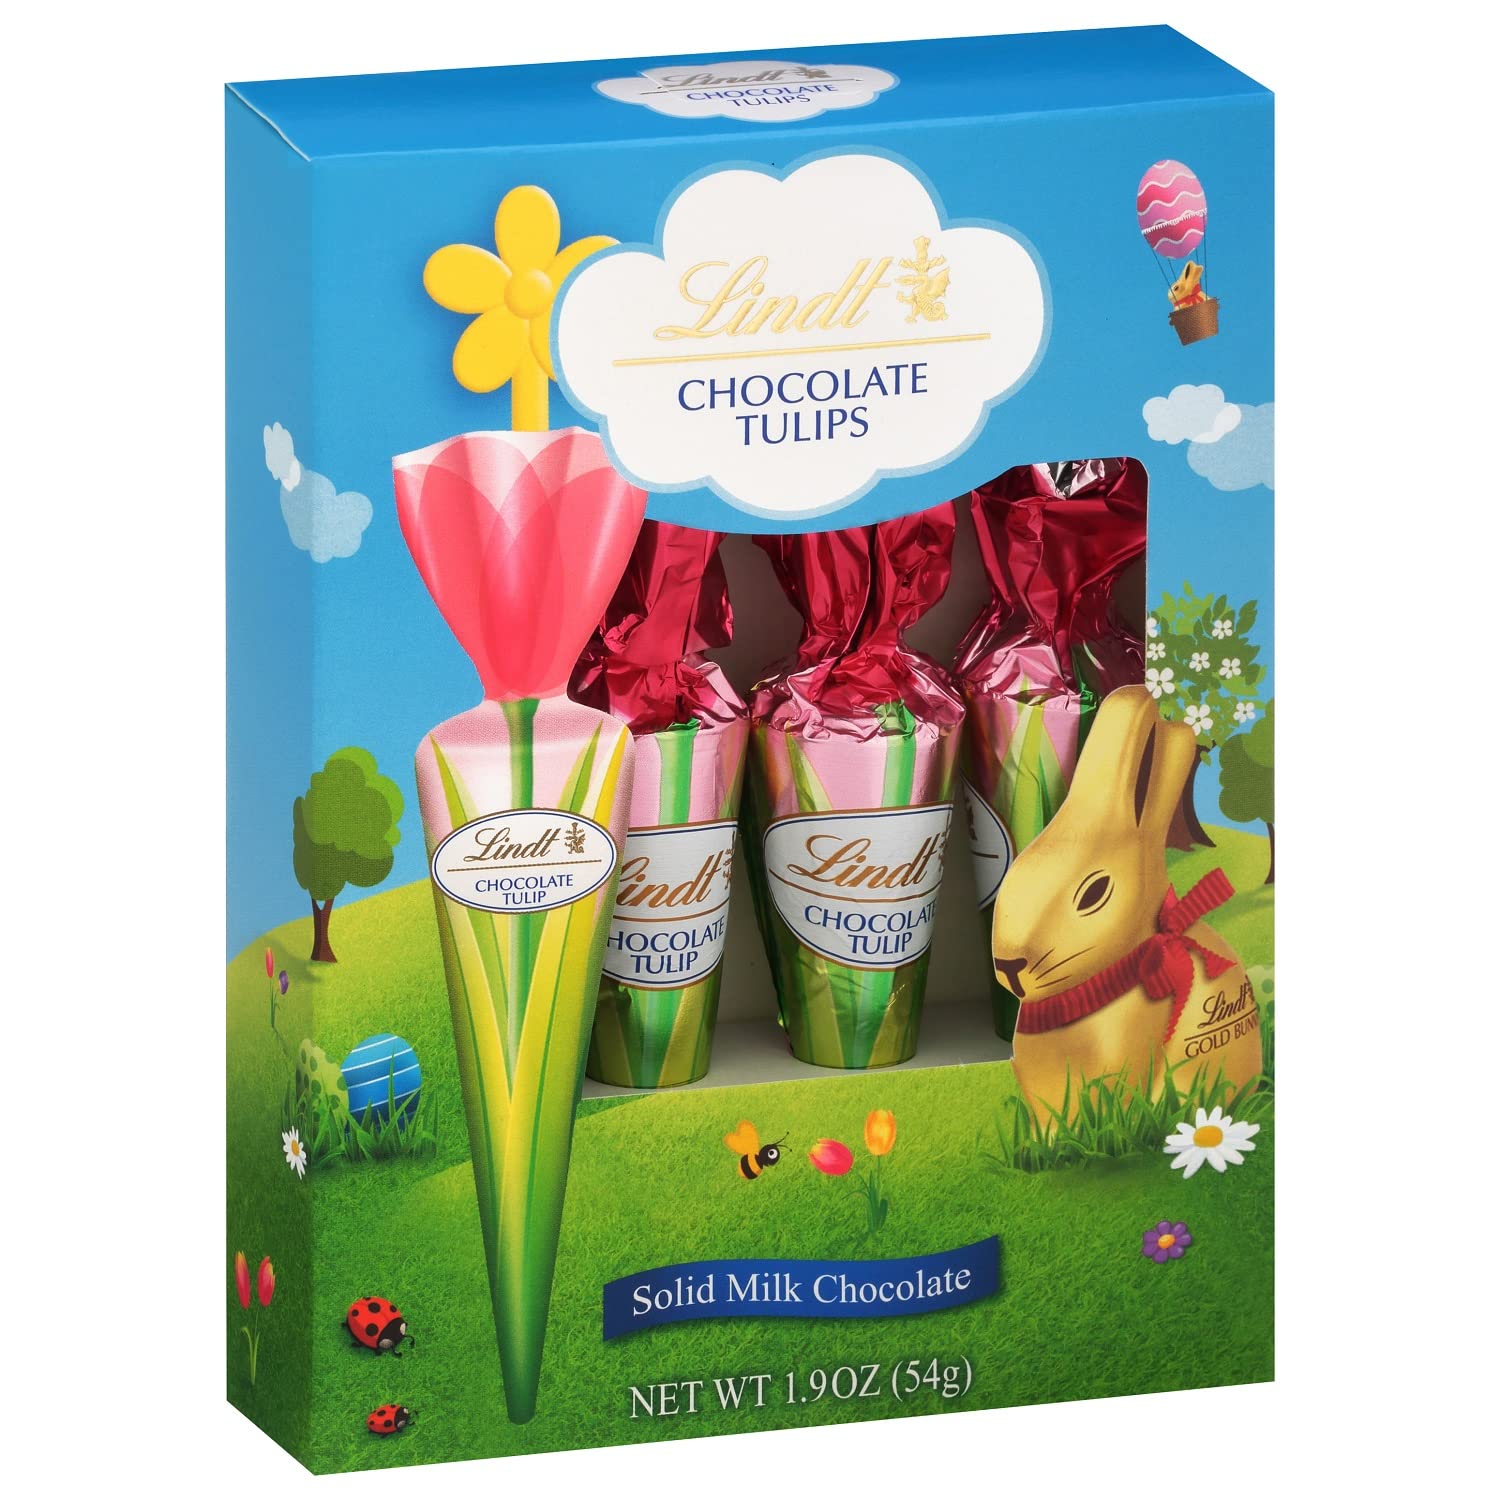 Lindt Chocolate Tulips - Four pack